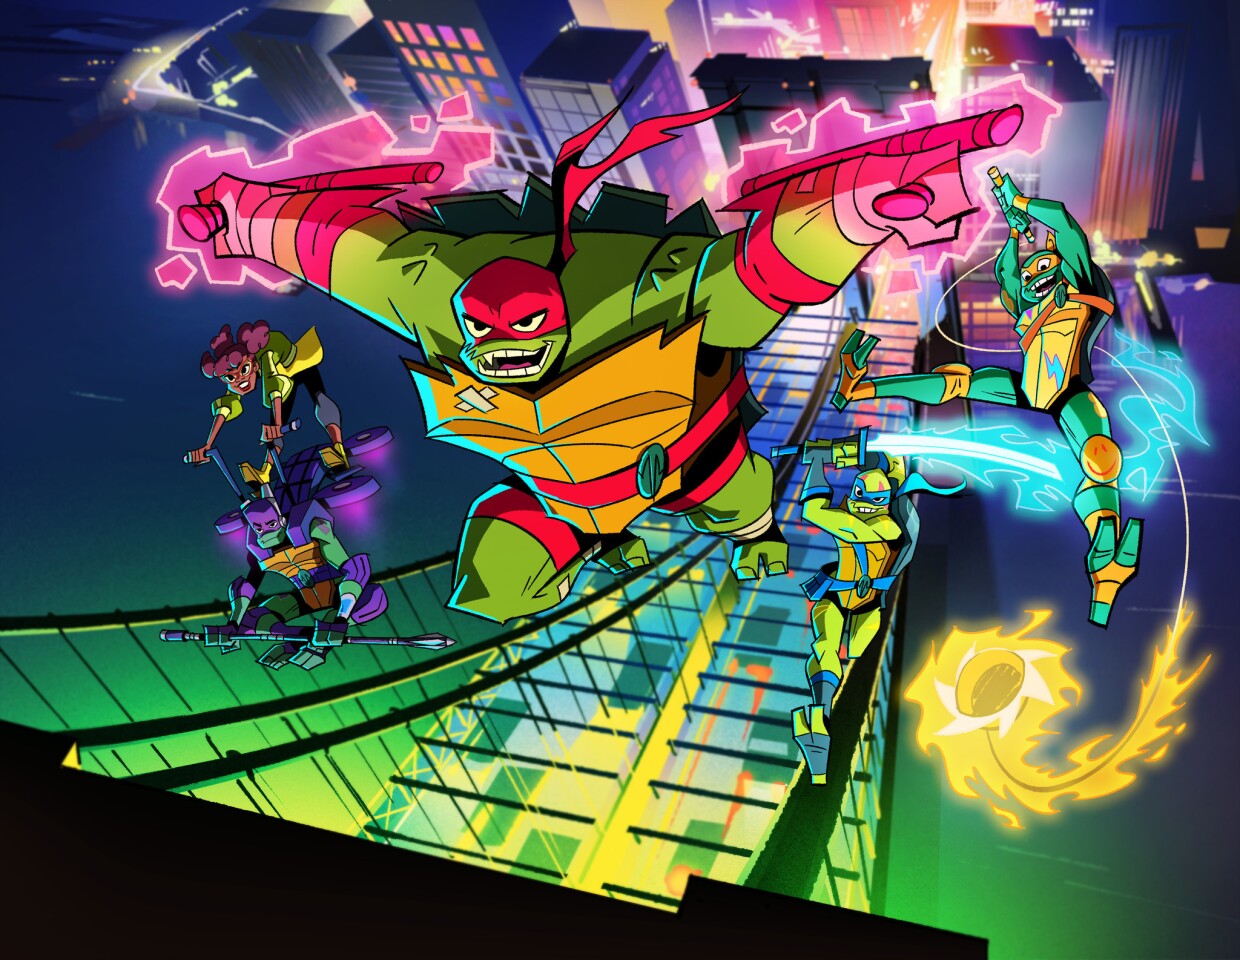 Nickelodeon's new animated series "Rise of the Teenage Mutant Ninja Turtles" reimagines the characters of the fan-favorite franchise.